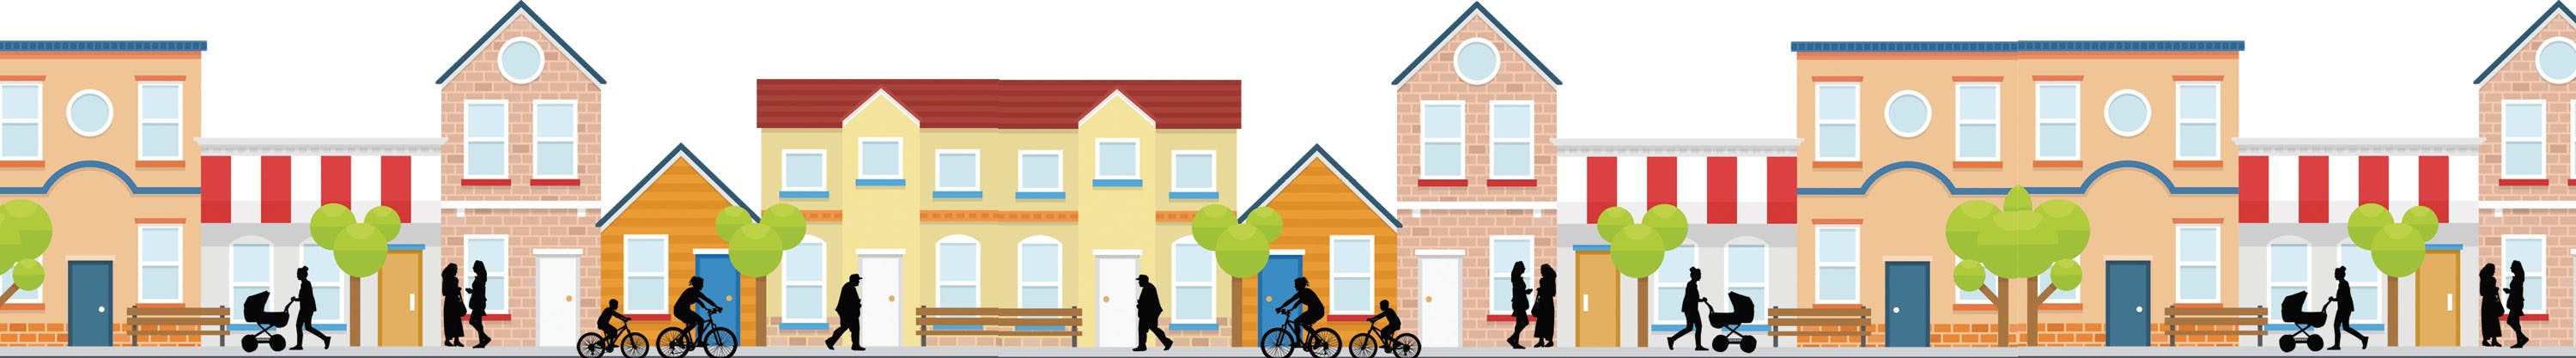 Illustration of pedestrians in front of housing and stores.